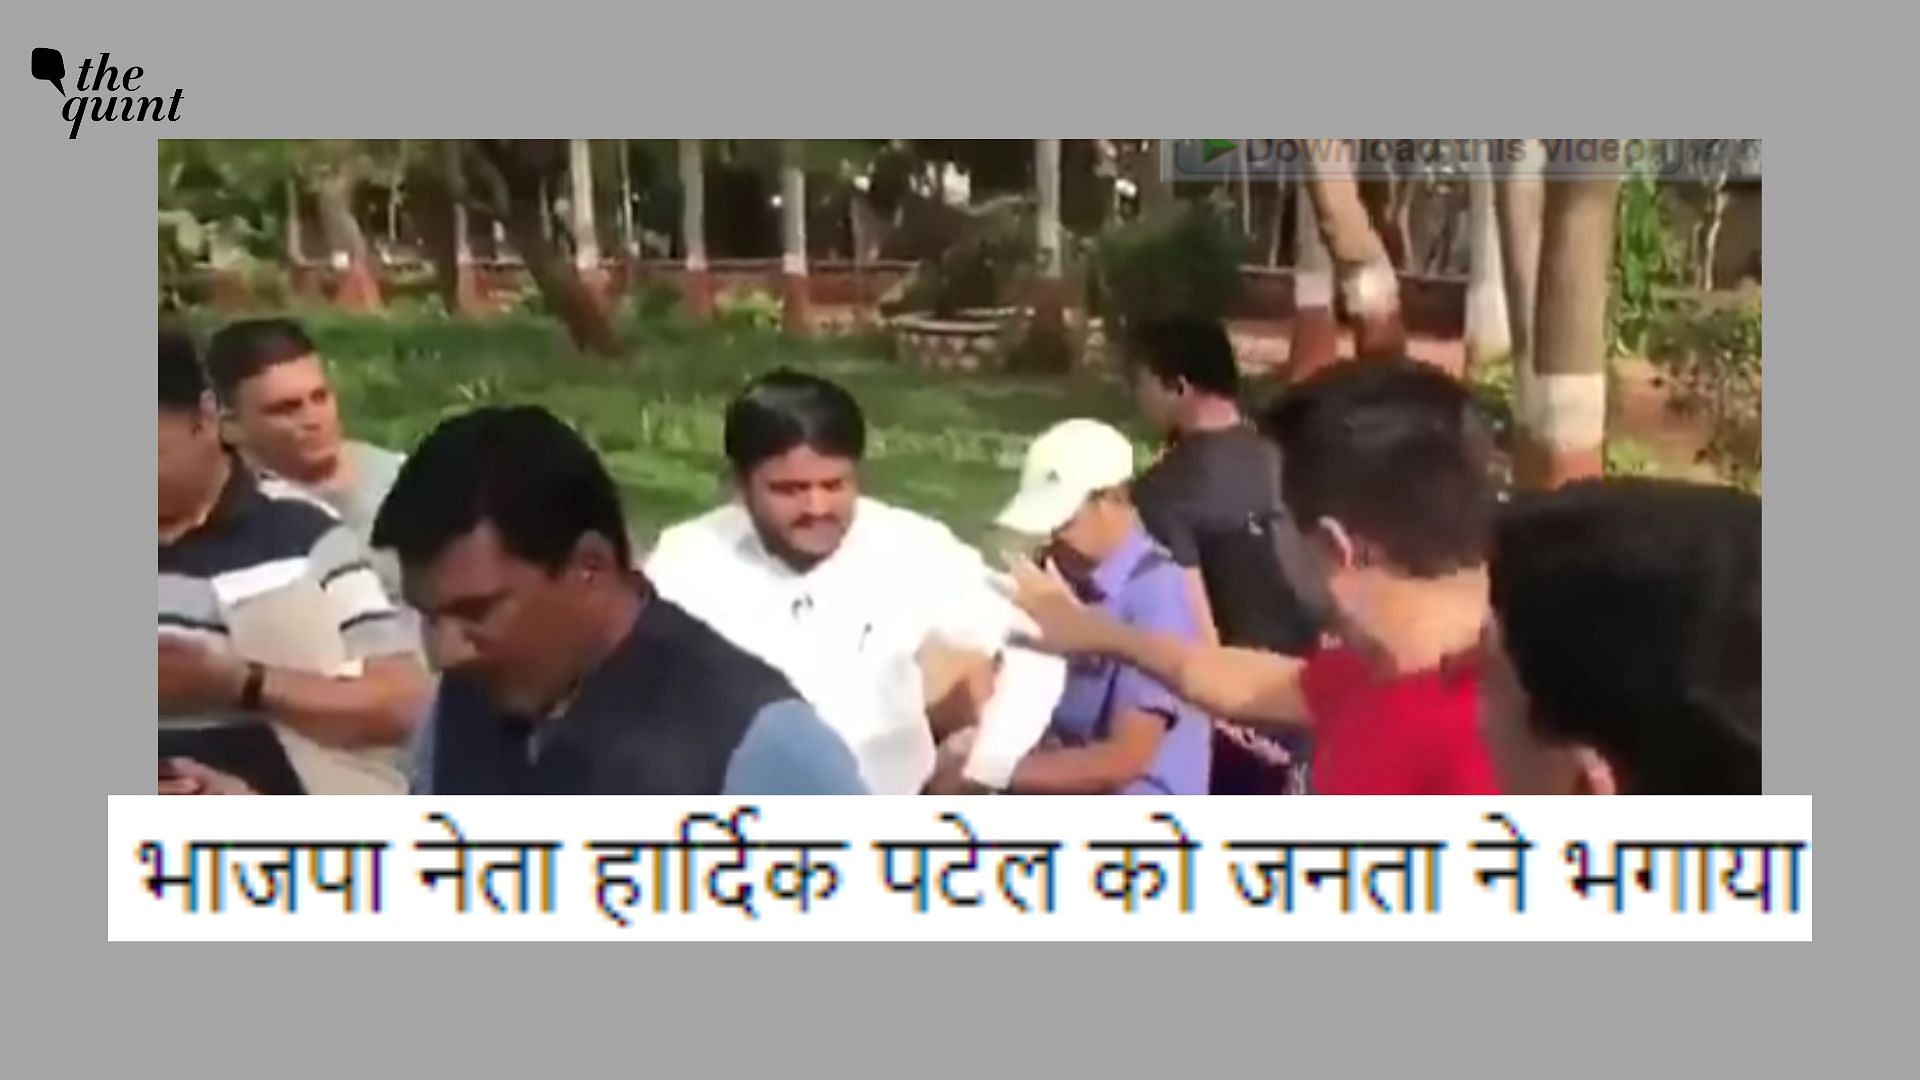 <div class="paragraphs"><p>The claim suggests that the video is from a recent incident and shows people chasing away BJP leader Hardik Patel.&nbsp;</p></div>